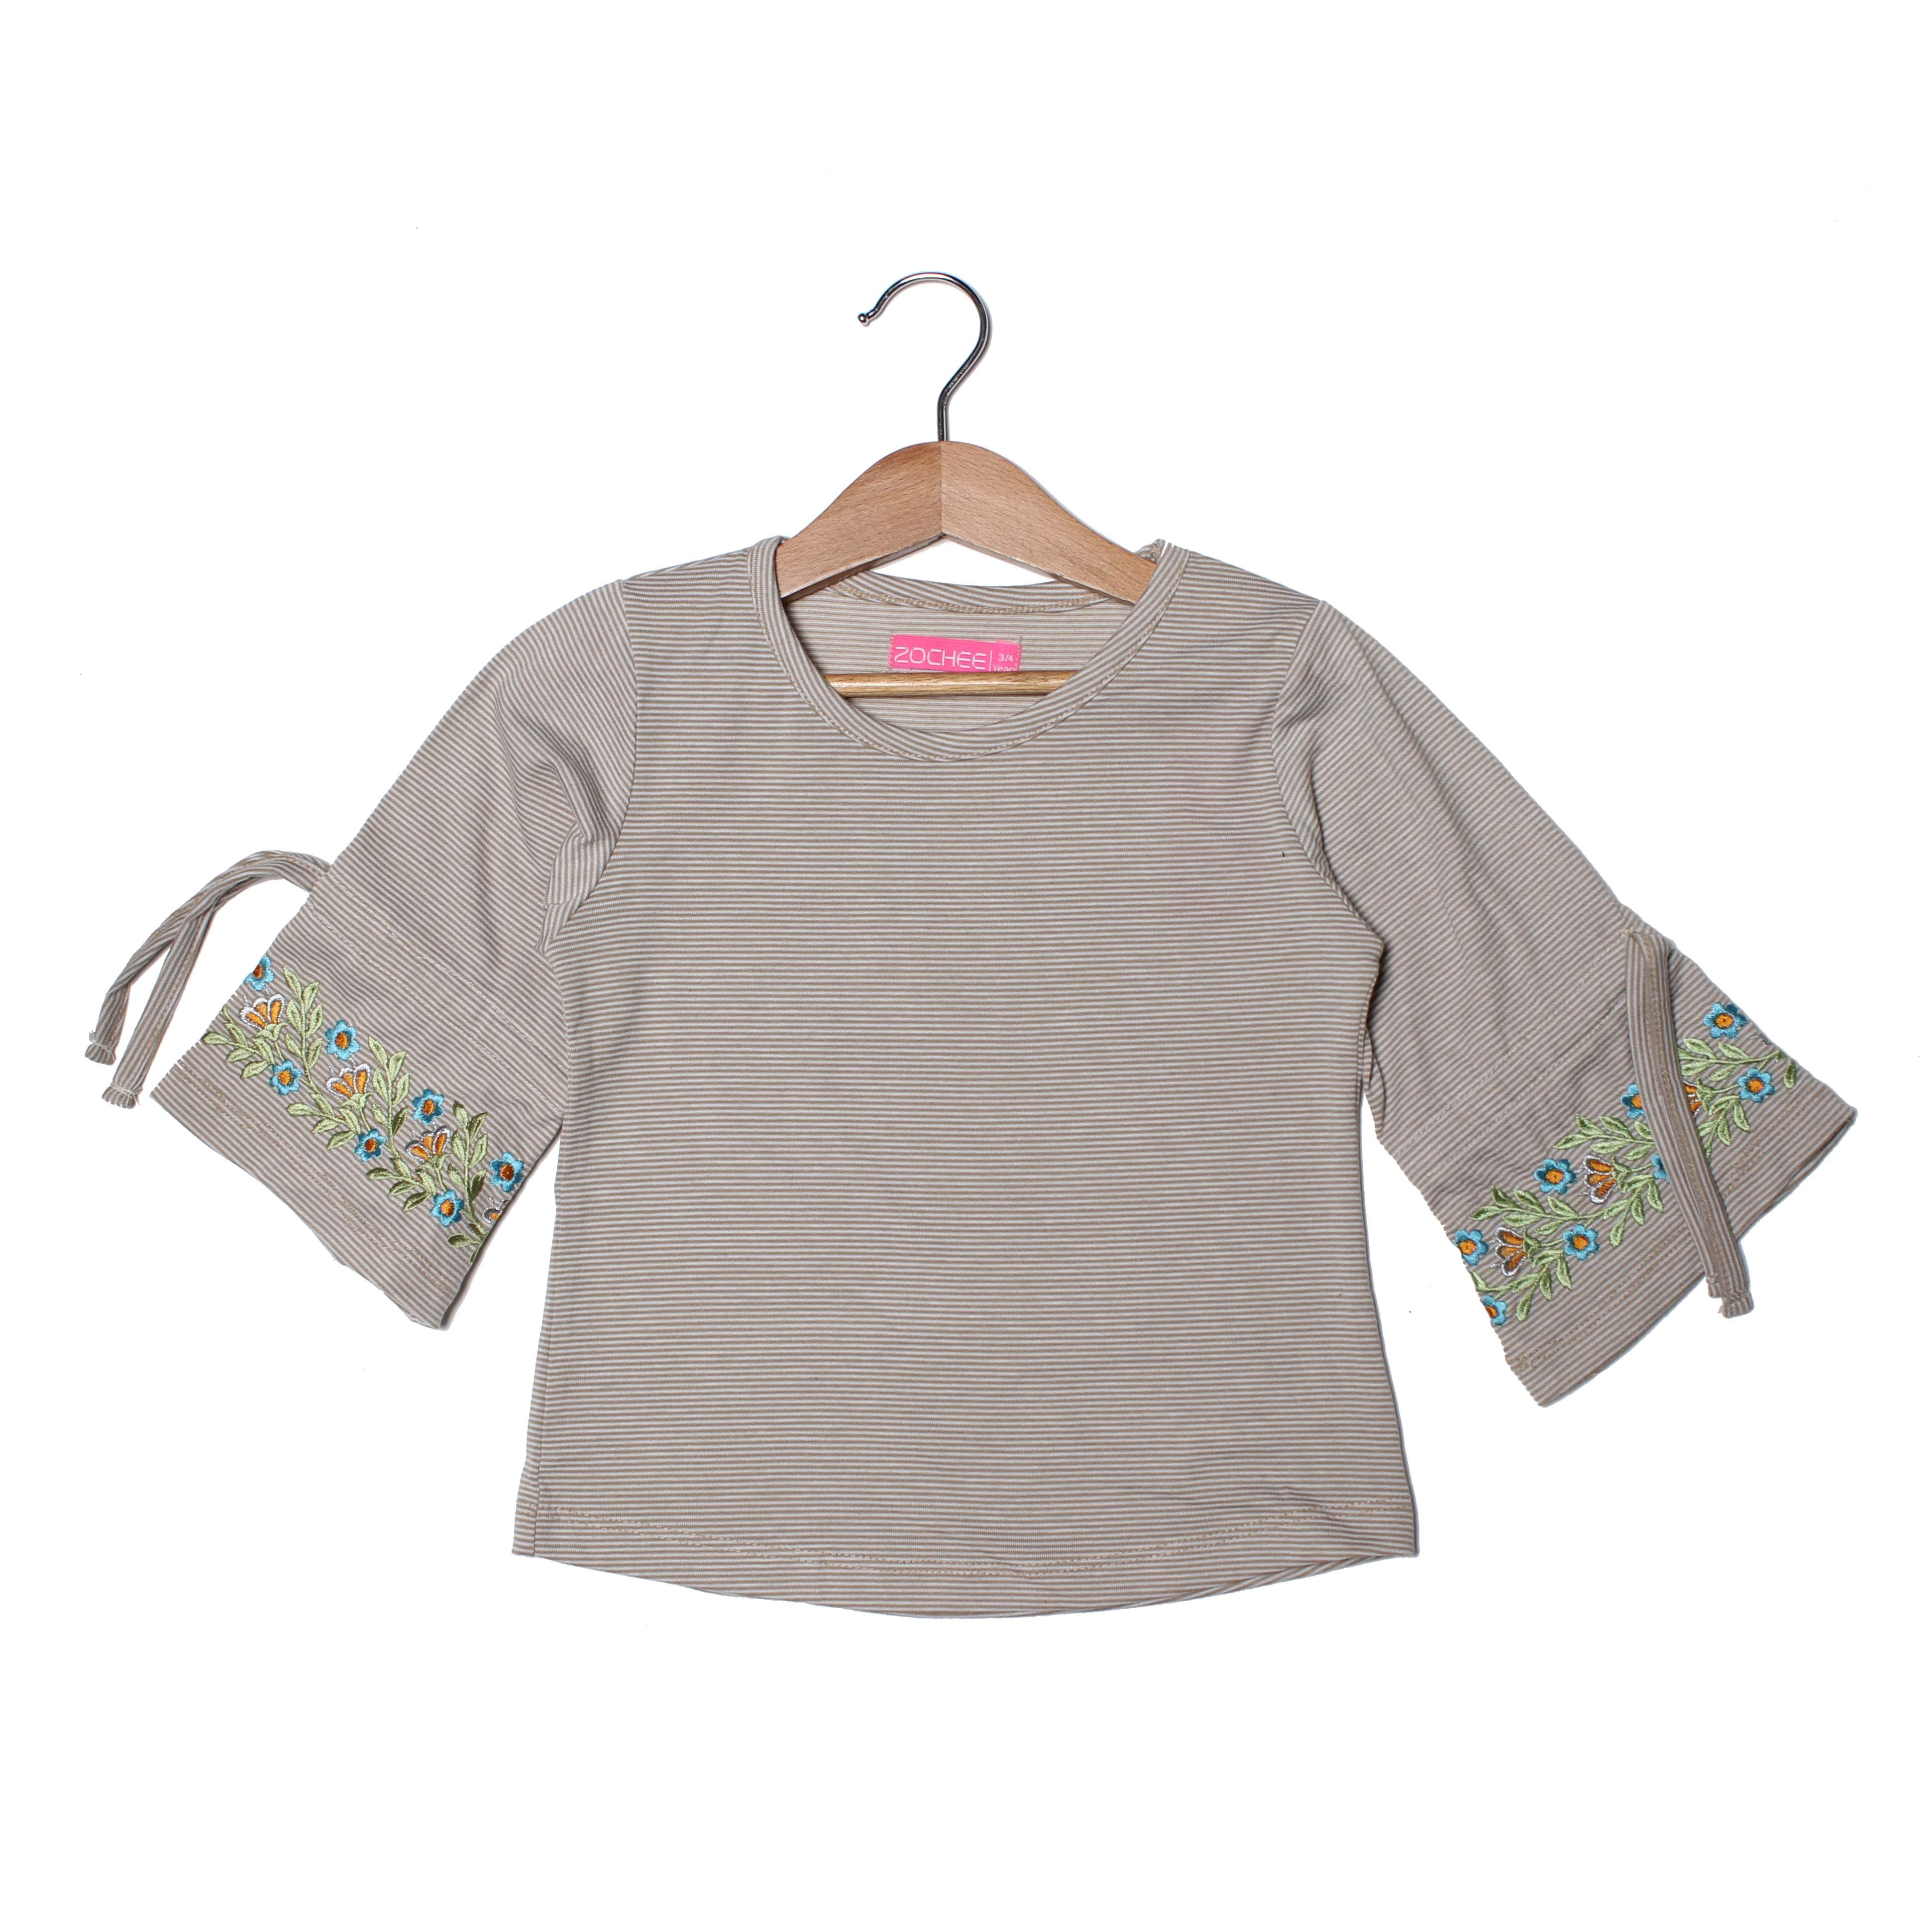 NEW FAWN STRIPES WITH FLOWERS PRINTED T-SHIRT TOP FOR GIRLS